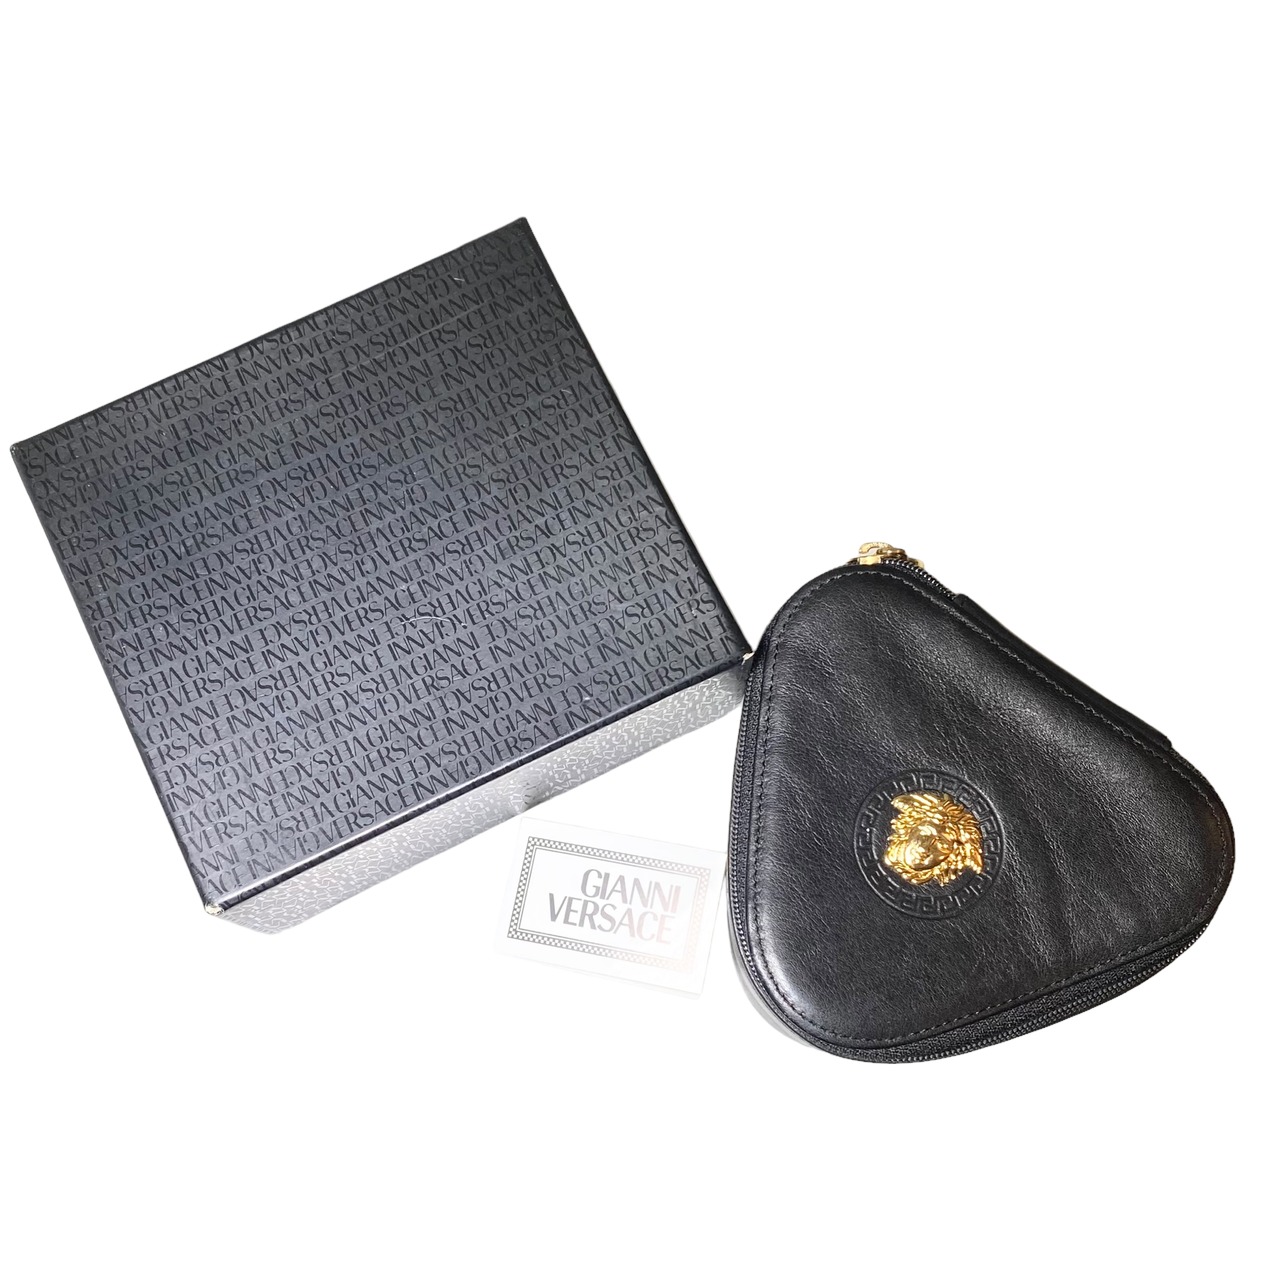 vintage GIANNI VERSACE leather jewelry case